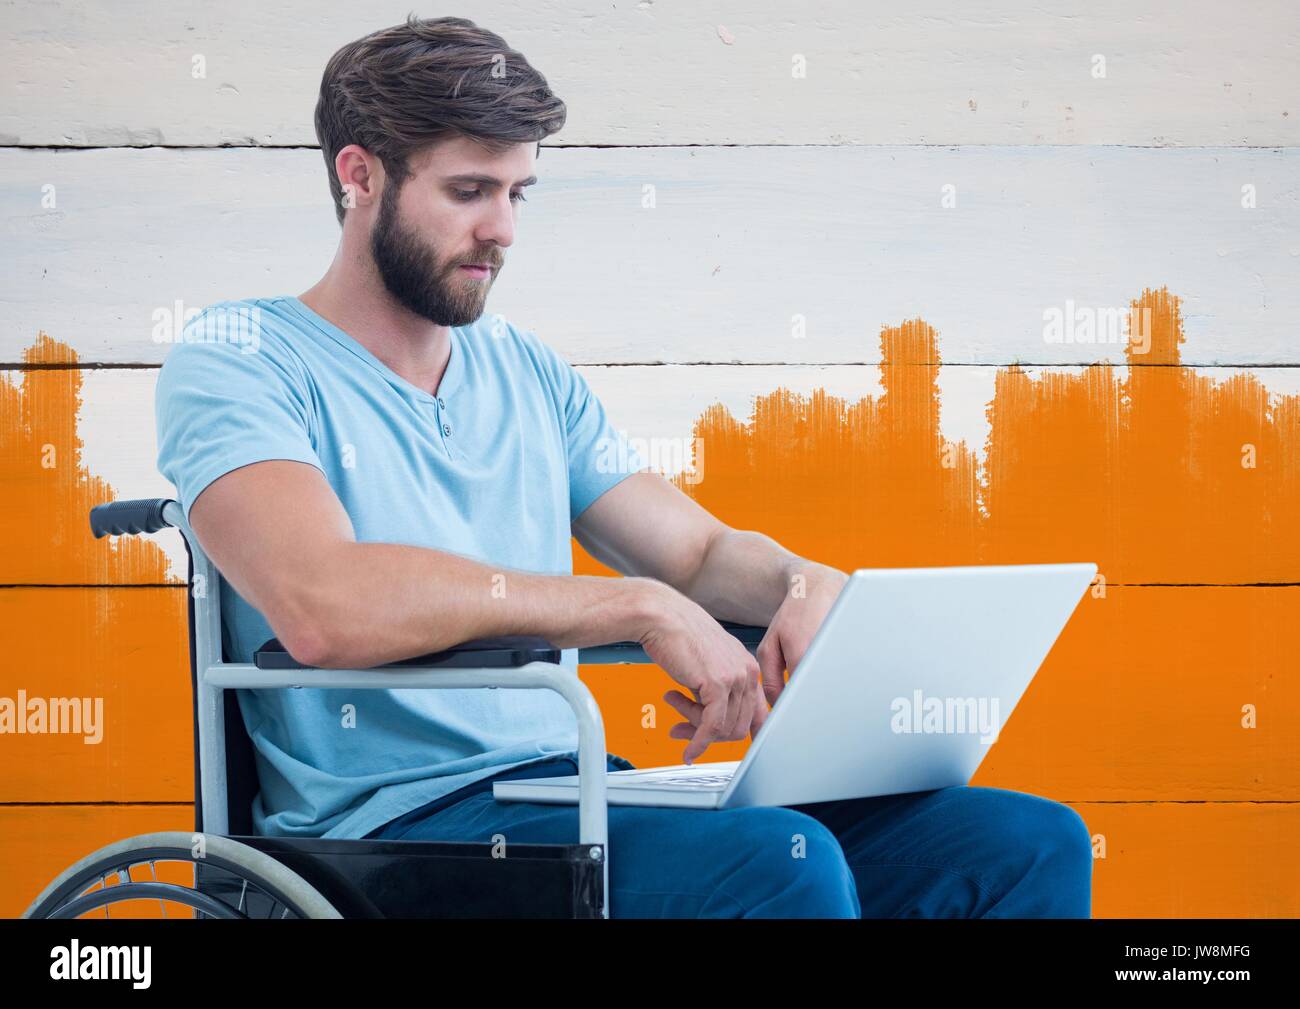 Digital composite of Disabled man in wheelchair with bright painted orange background Stock Photo